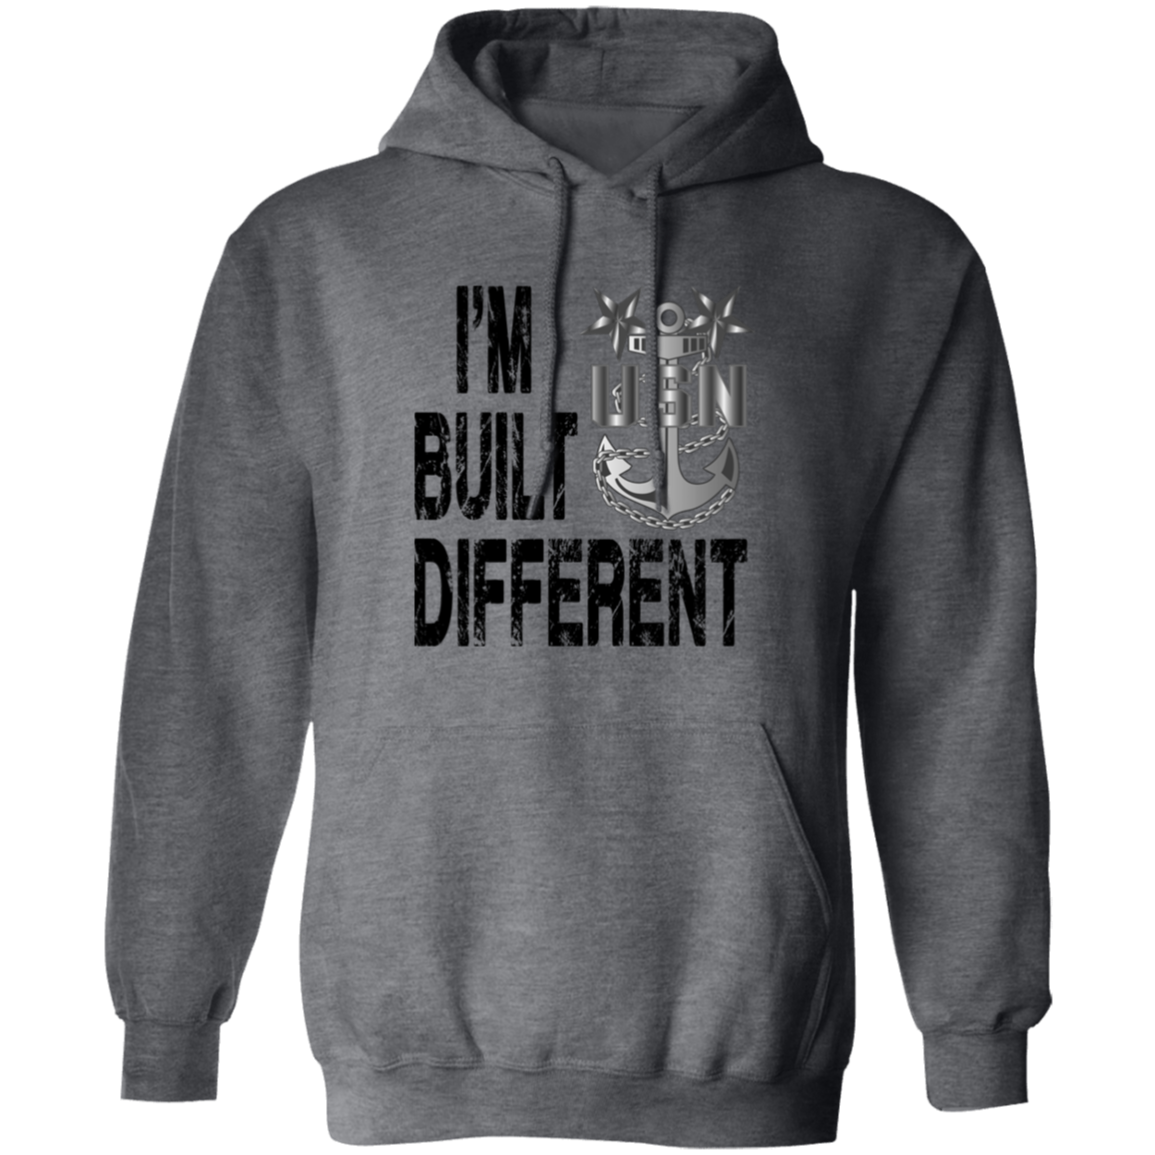 Built Different Master Chief Pullover Hoodie